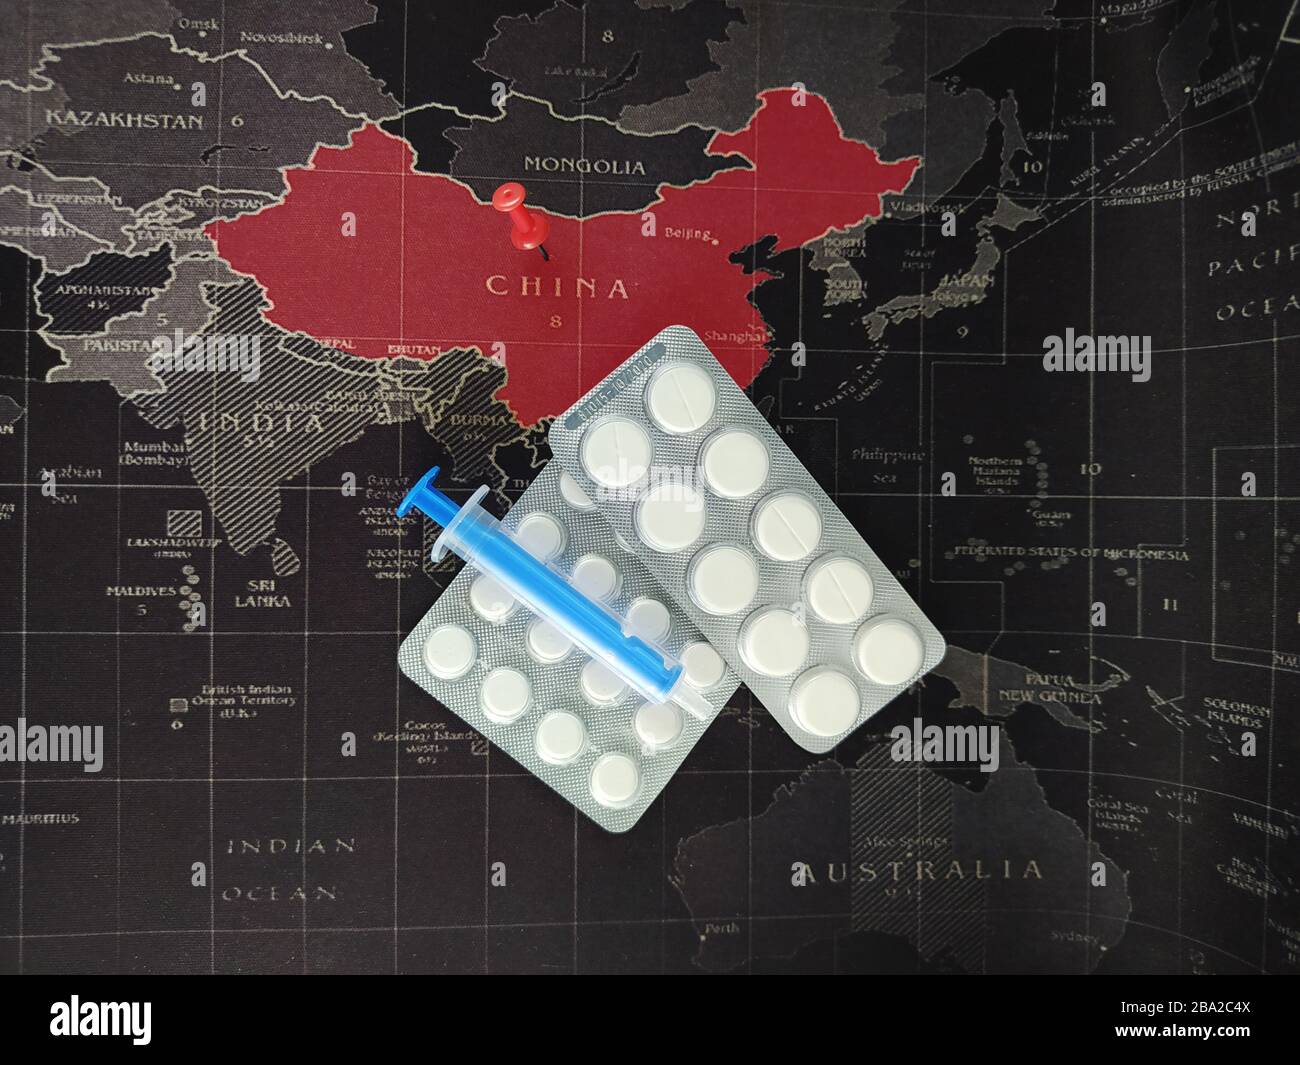 Coronavirus COVID-19. Cure concept representing the Chinese Wuhan's virus with pills and syringe. World map in the background. Dangerous flu strain ca Stock Photo